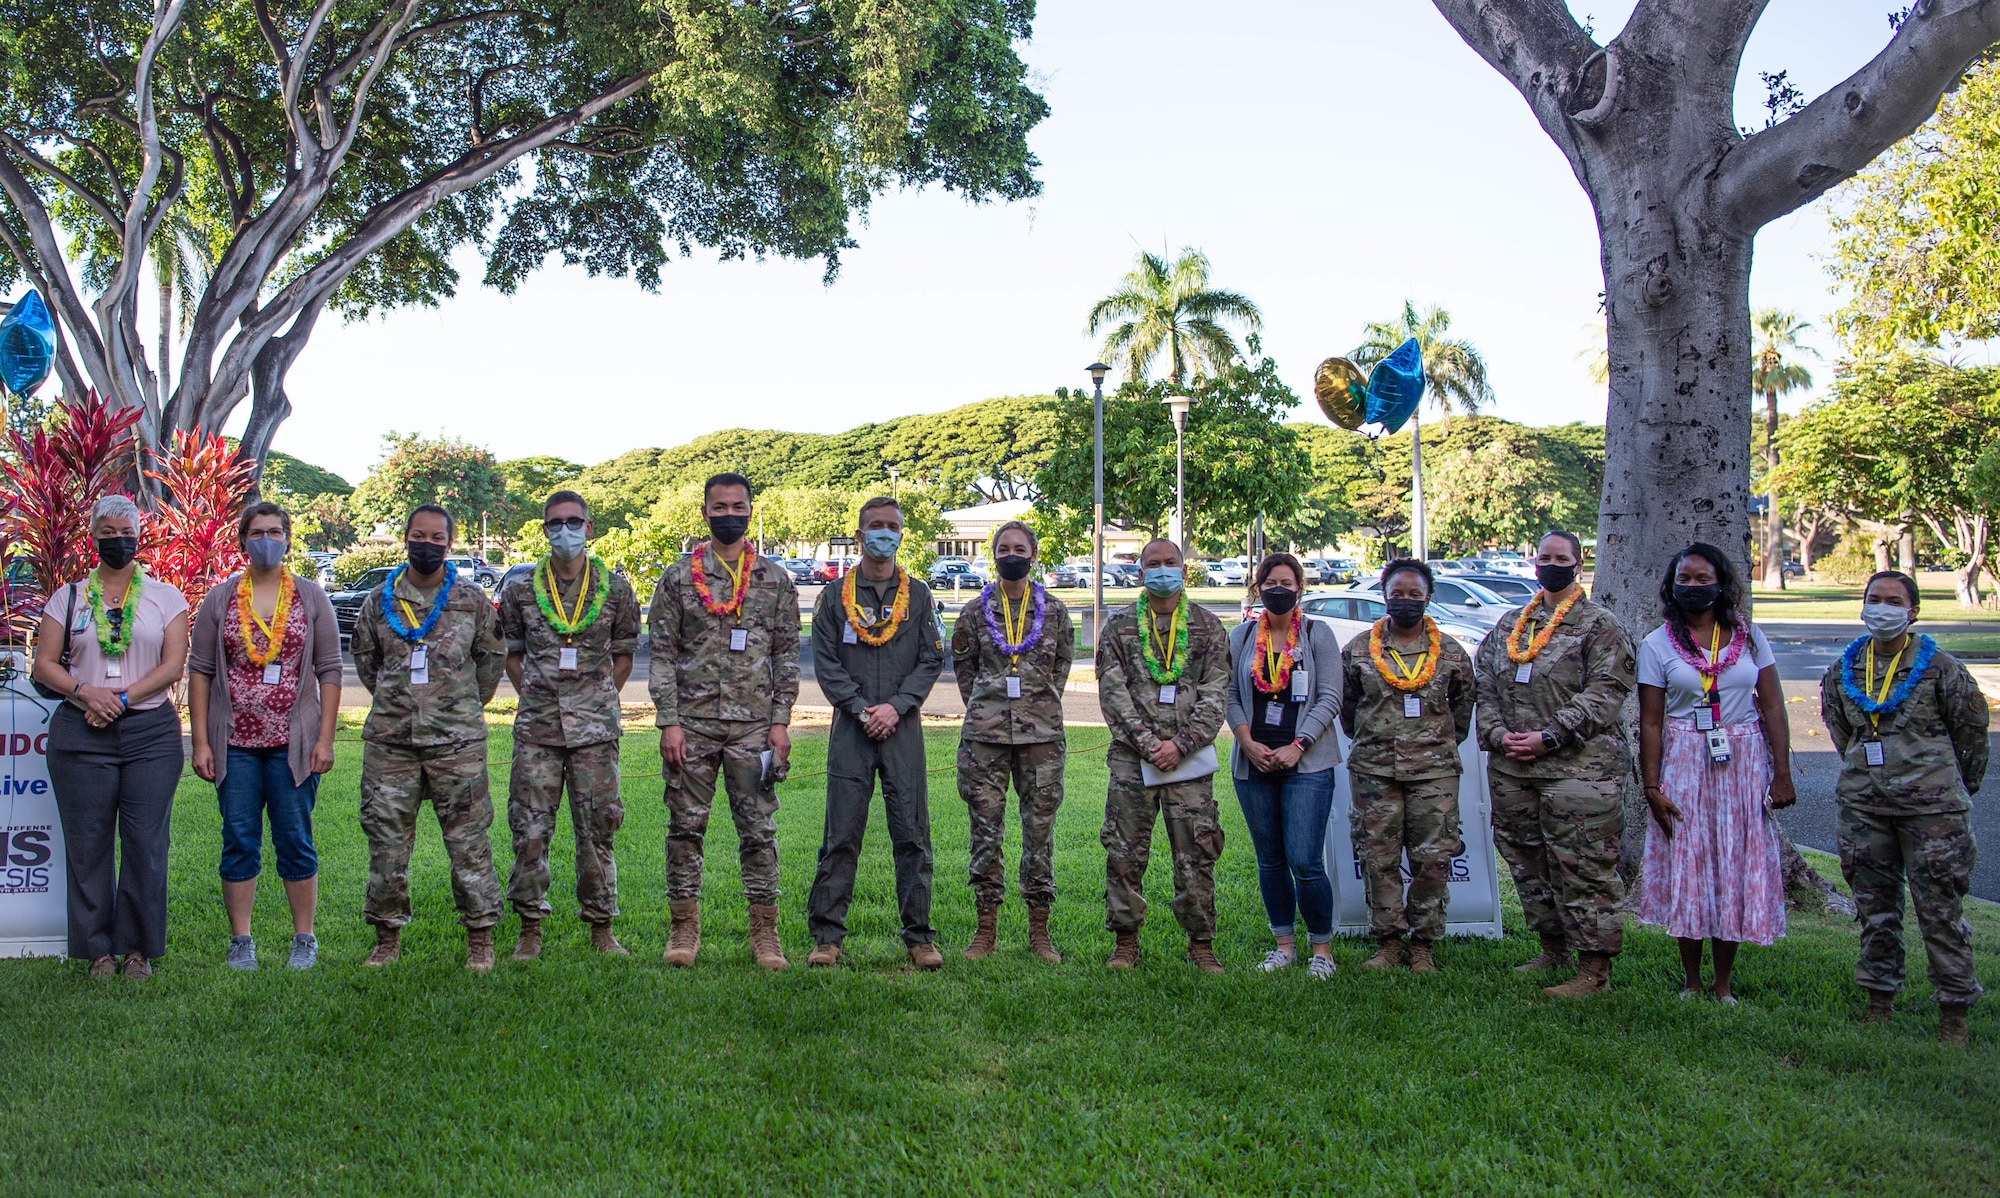 Active-duty and civilian Military Health System Genesis peer experts stand together after receiving leis during the MHS Genesis launch ceremony at Joint Base Pearl Harbor-Hickam, Hawaii, Sept. 25, 2021. The 12 peer experts volunteered to assist the 15th Medical Group during its initial utilization of MHS Genesis. The individuals were representatives from Elmendorf Air Force Base, Beale AFB, Fairchild AFB, Travis AFB, Nellis AFB, Fort Irwin, Naval Hospital Twentynine Palms, and Naval Medical Center San Diego. (U.S. Air Force by Senior Airman Alan Ricker)